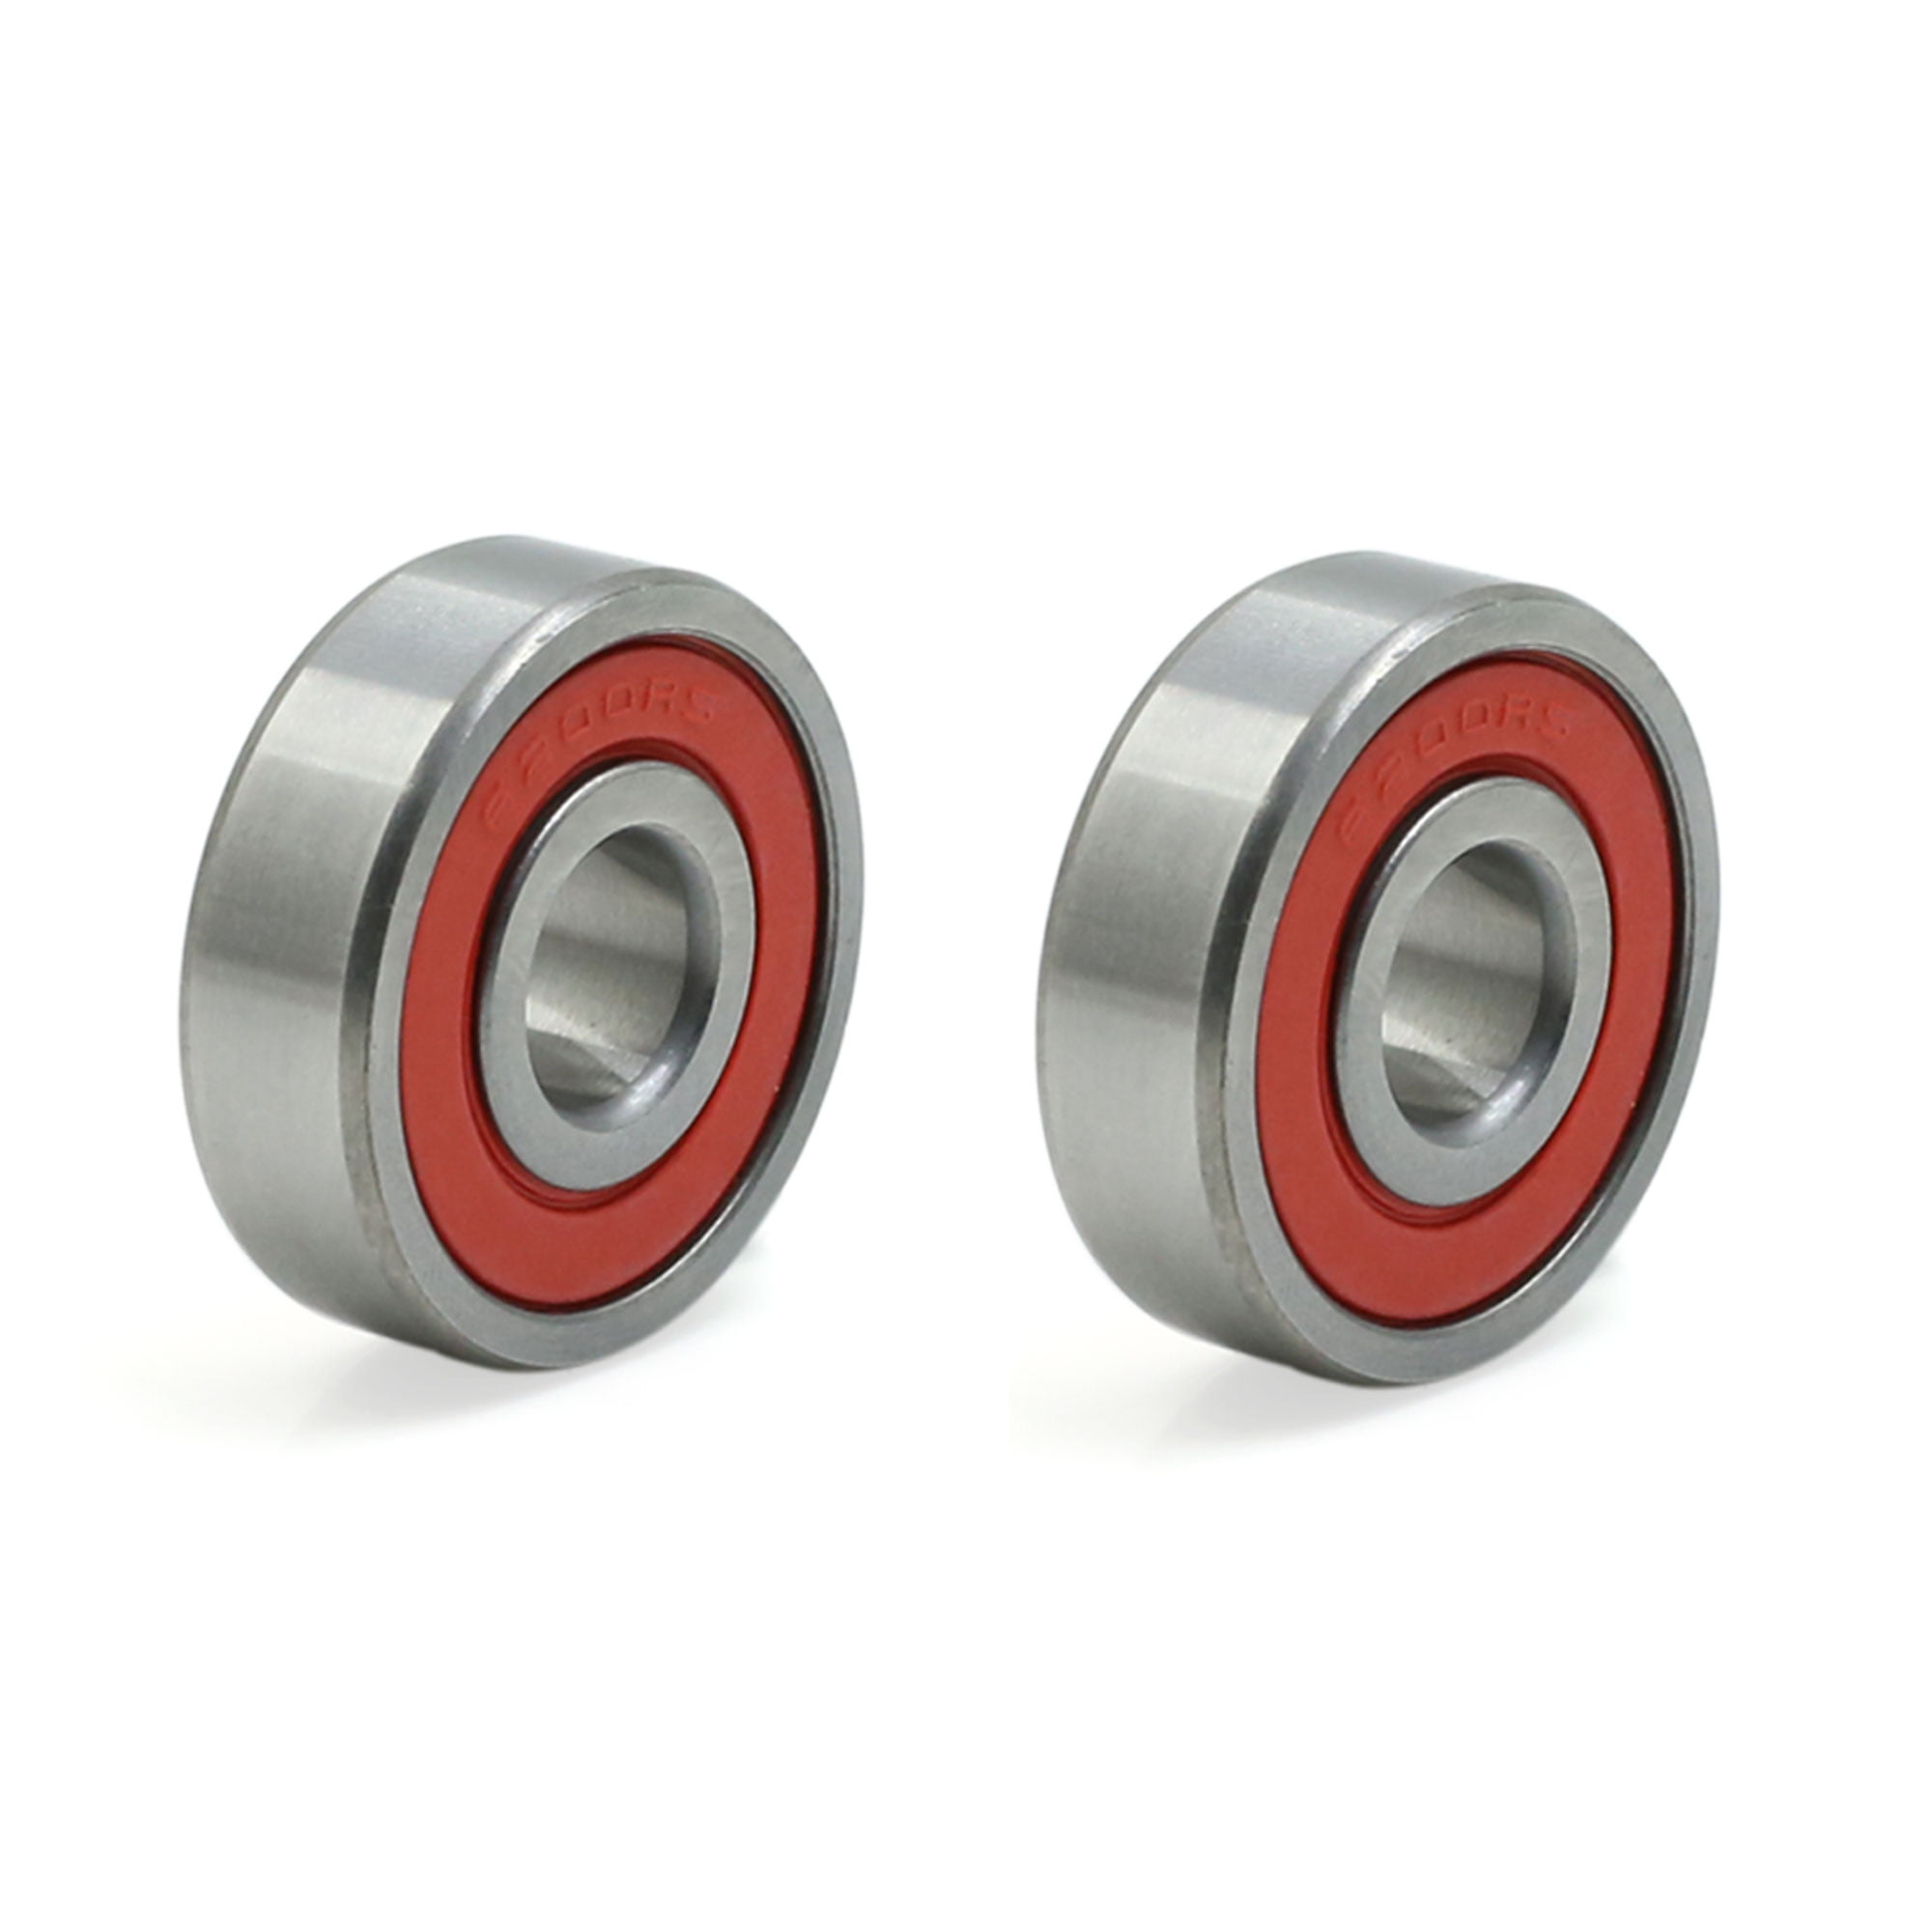 11MM OR 10MM ID BUSHING SPACER ALUMINUM 28MM OD X 13MM 12MM 